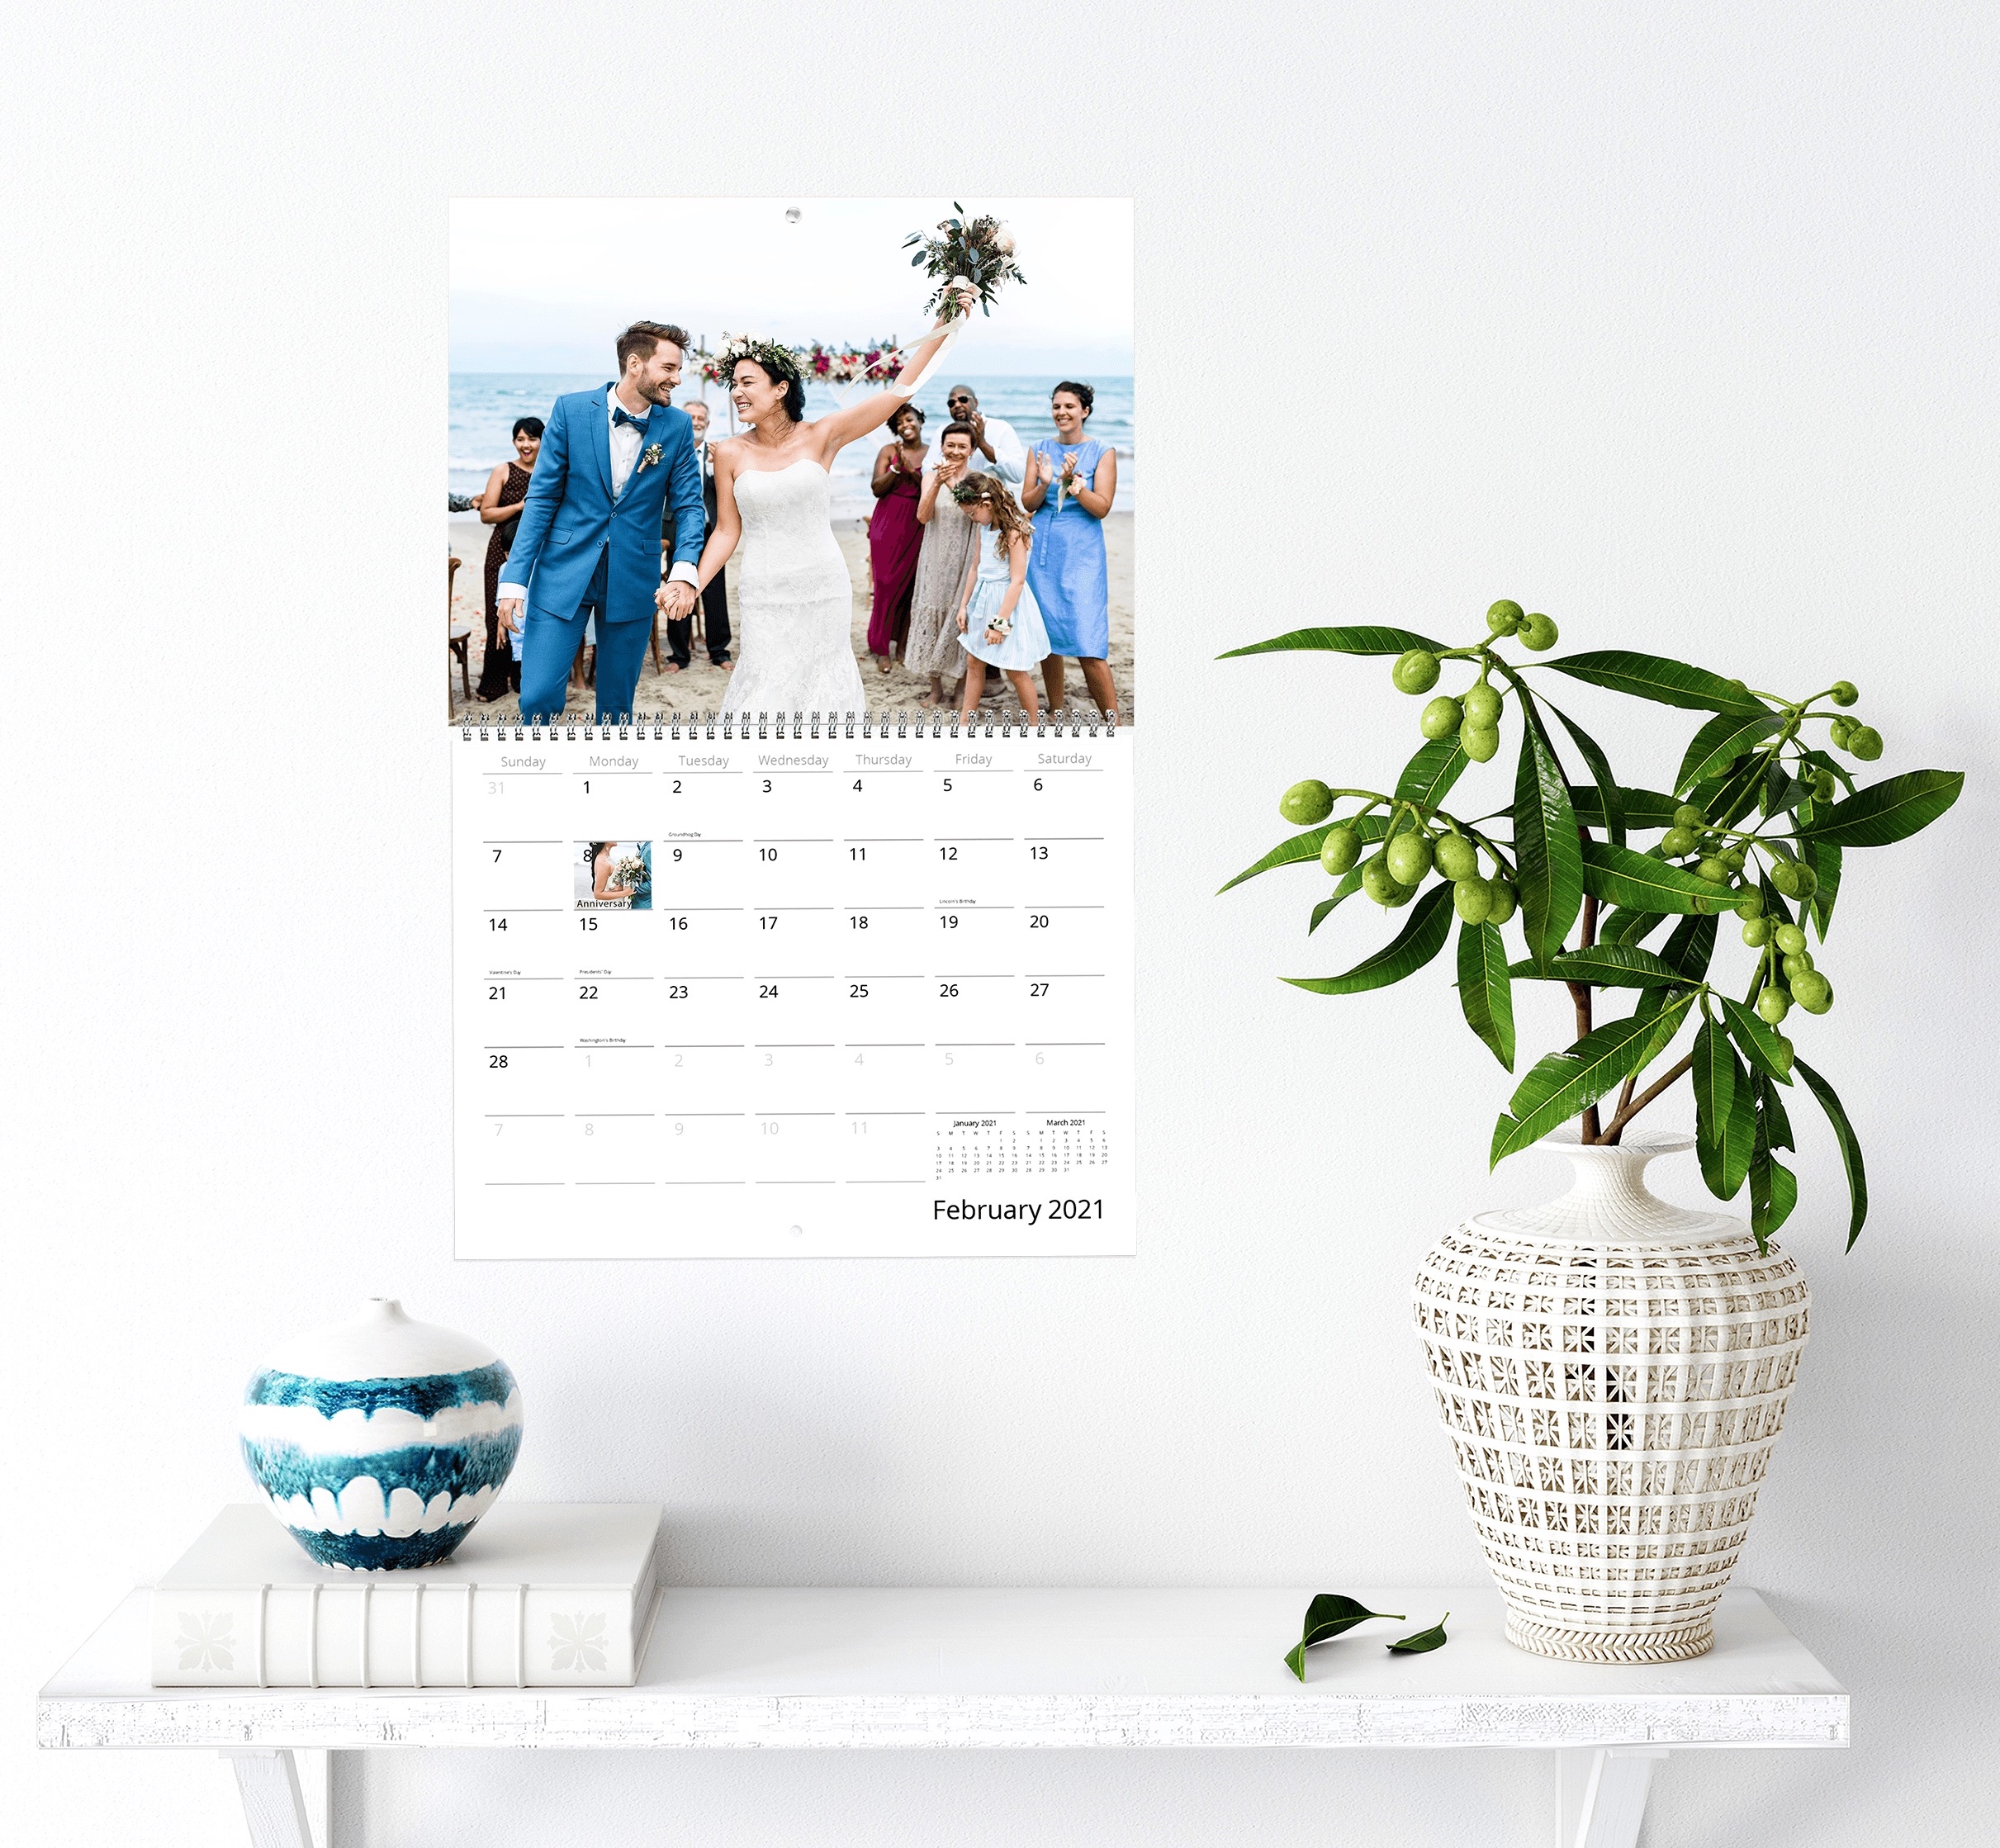 7 Ideas to Make a Great Personalized Calendar Mimeo Photos